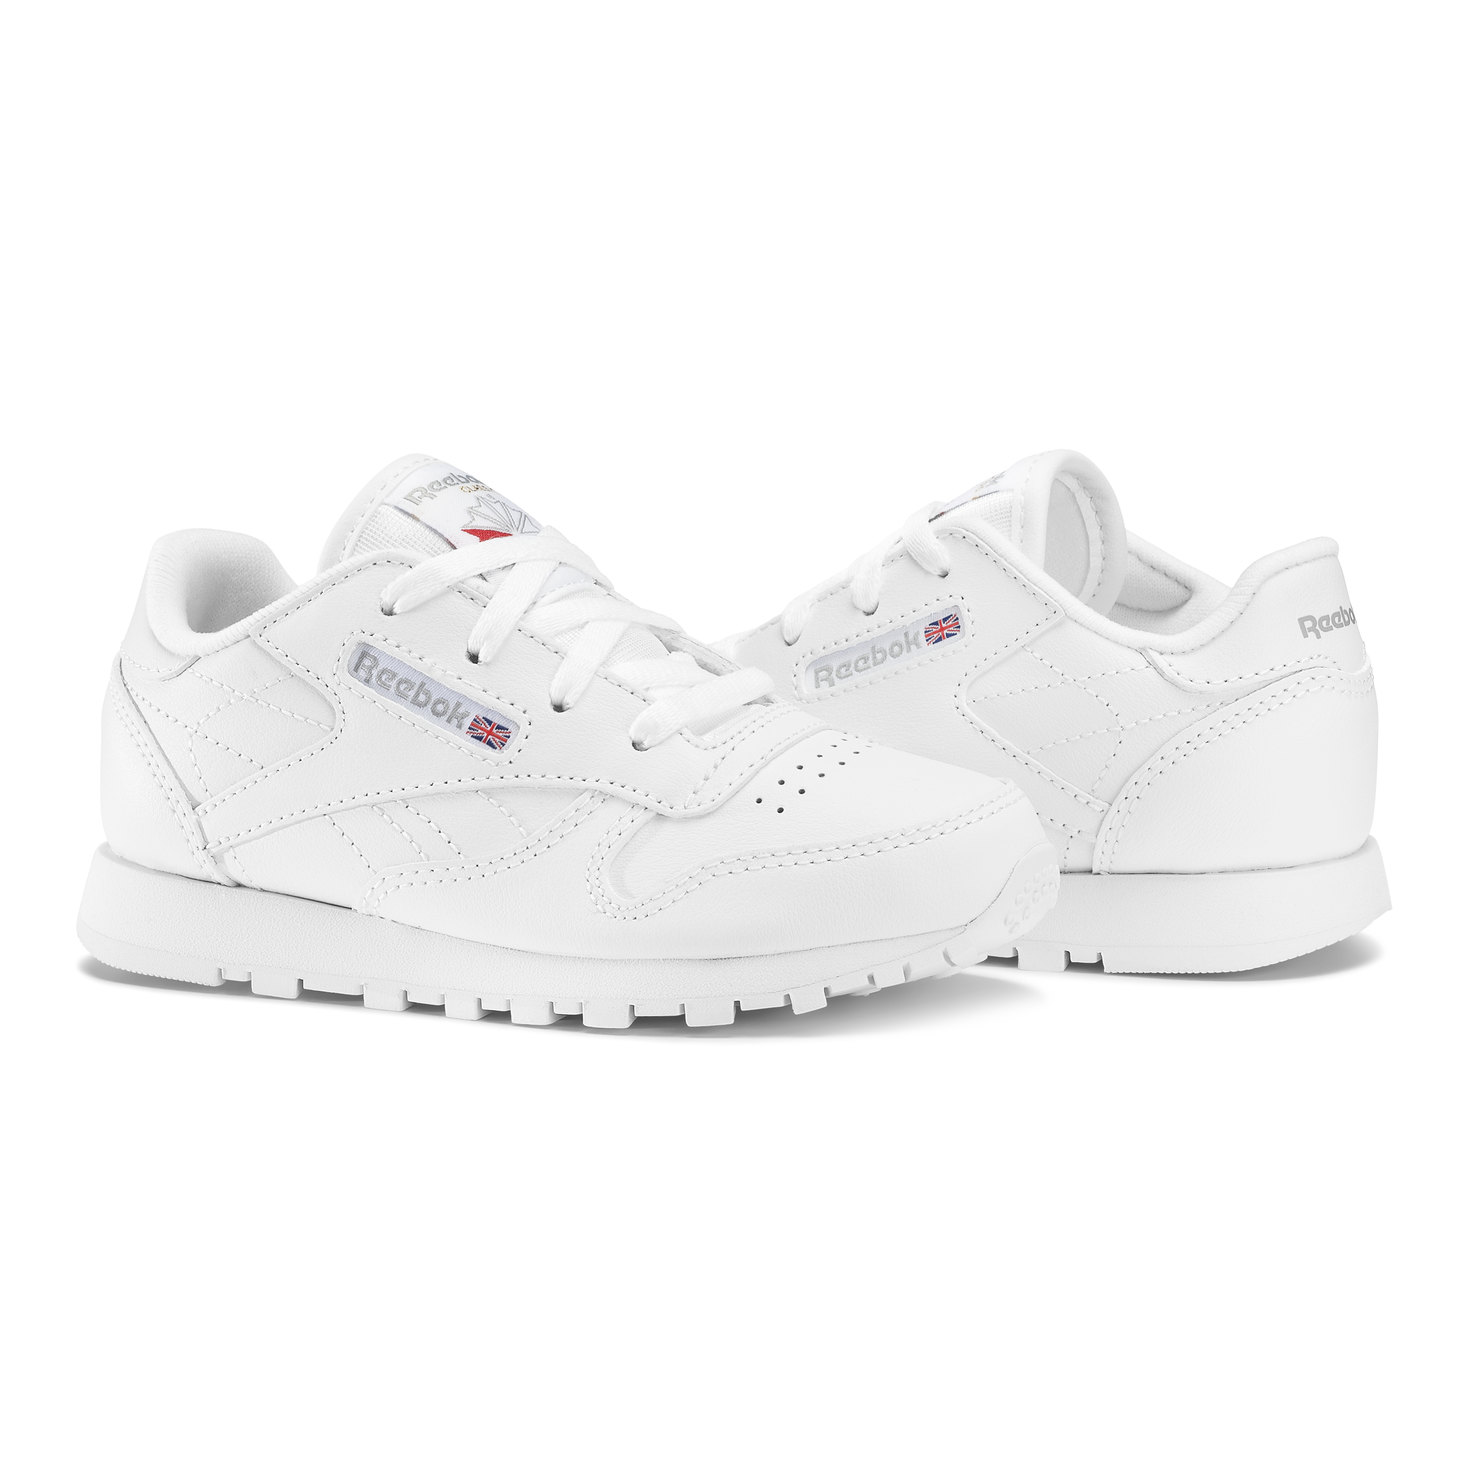 CLassic Leather Shoes | Reebok